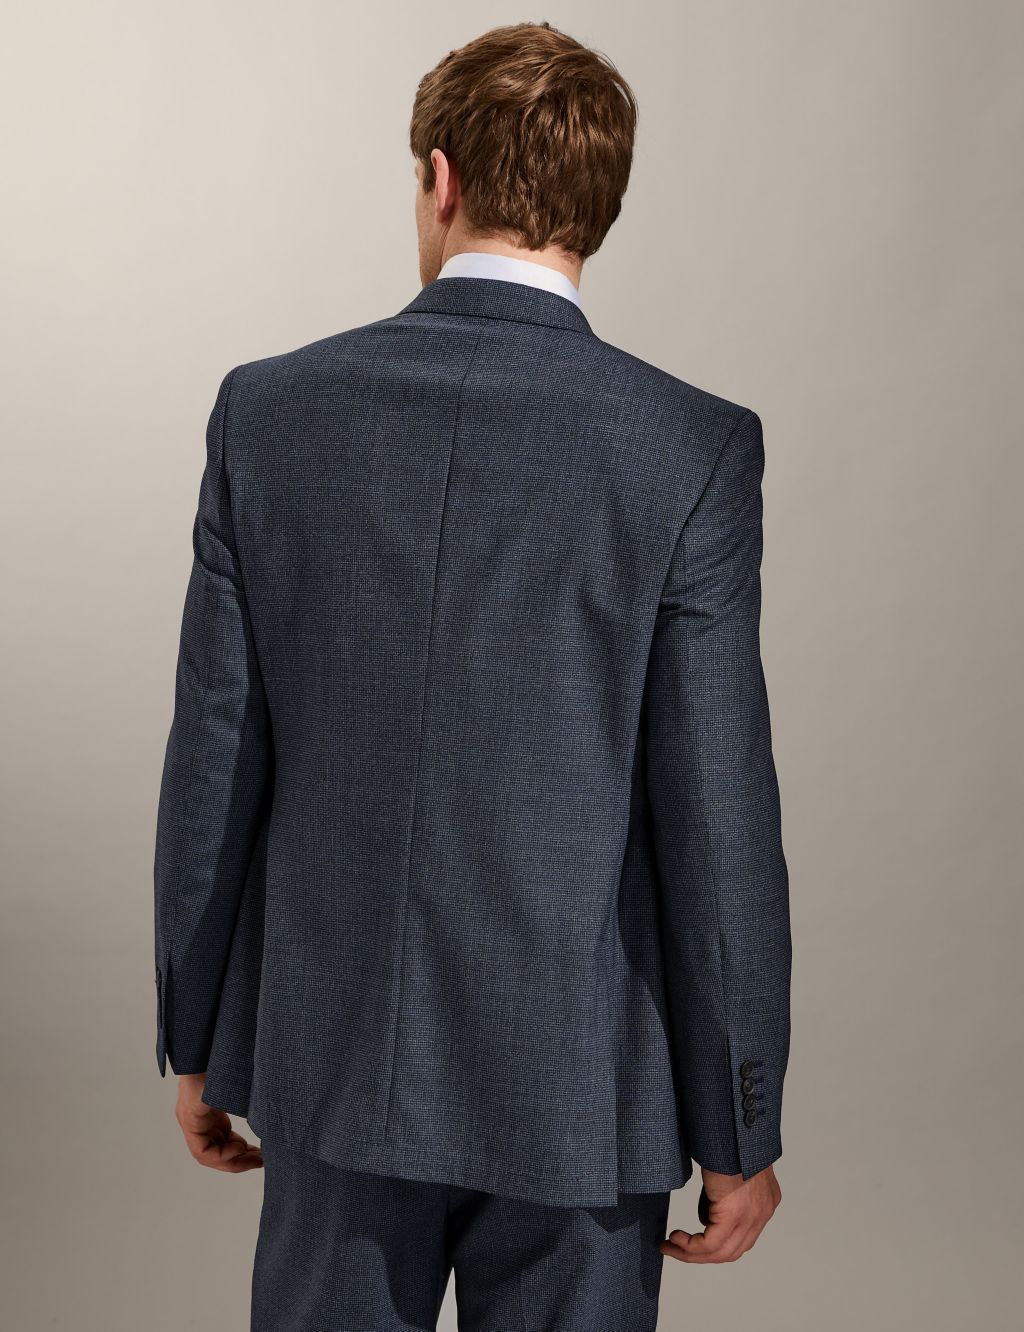 Tailored Fit Bi-Stretch Puppytooth Jacket image 6